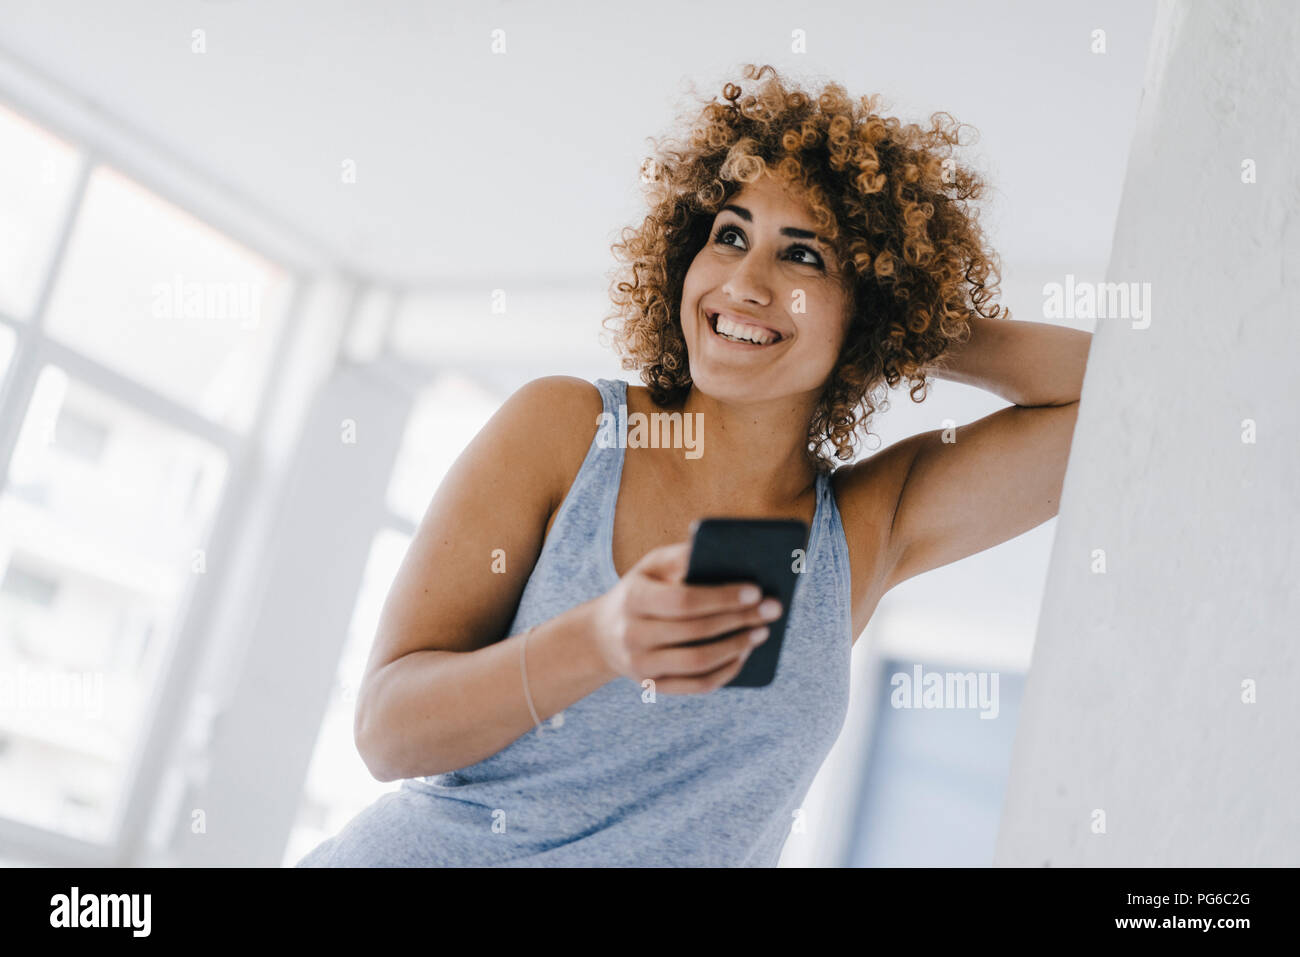 Laughing woman using smartphone Stock Photo